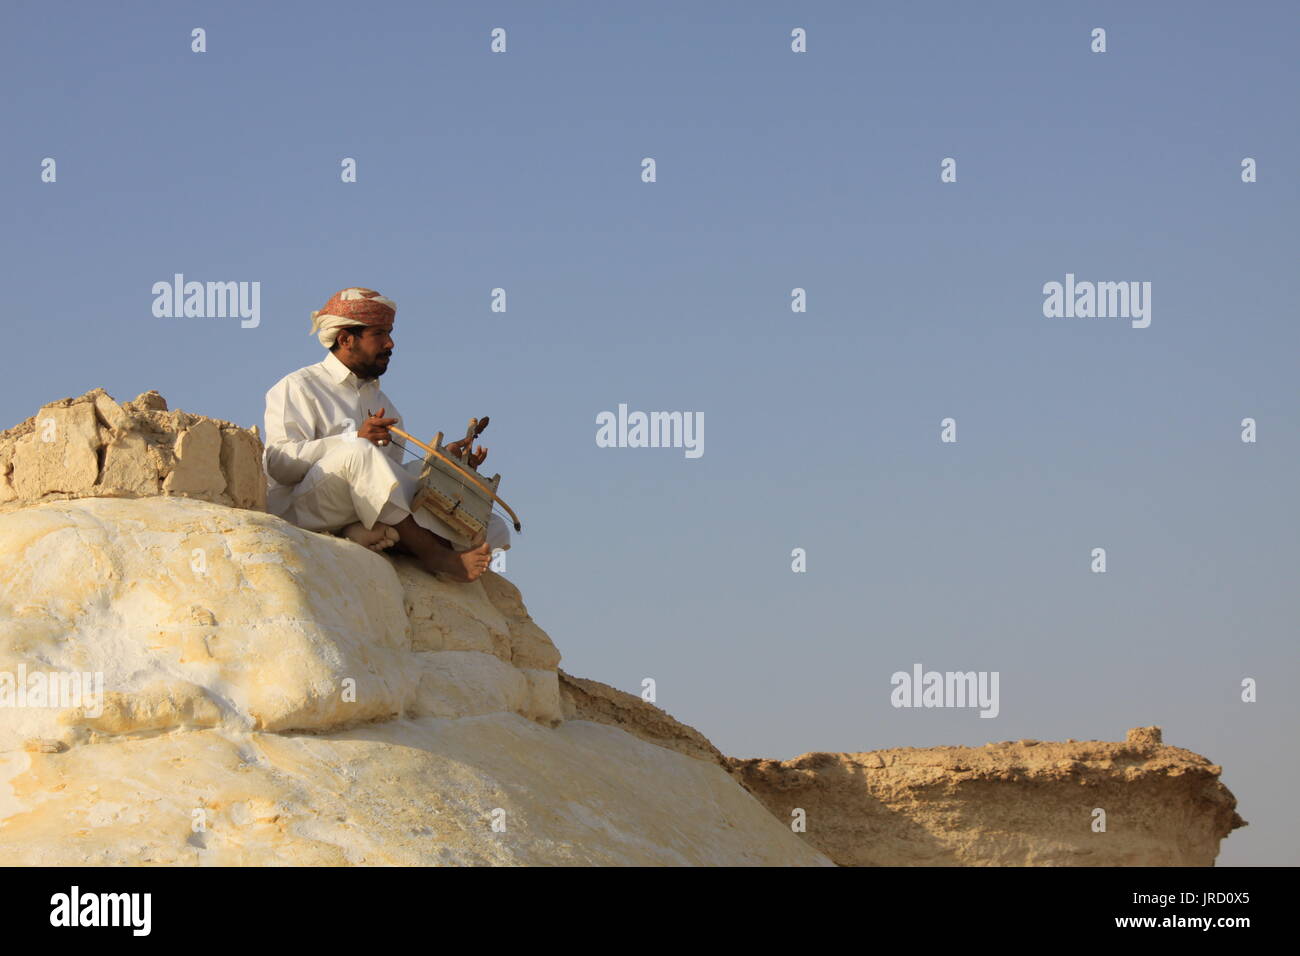 Man on a cliff playing traditional Arabic music by using classical instrument Stock Photo